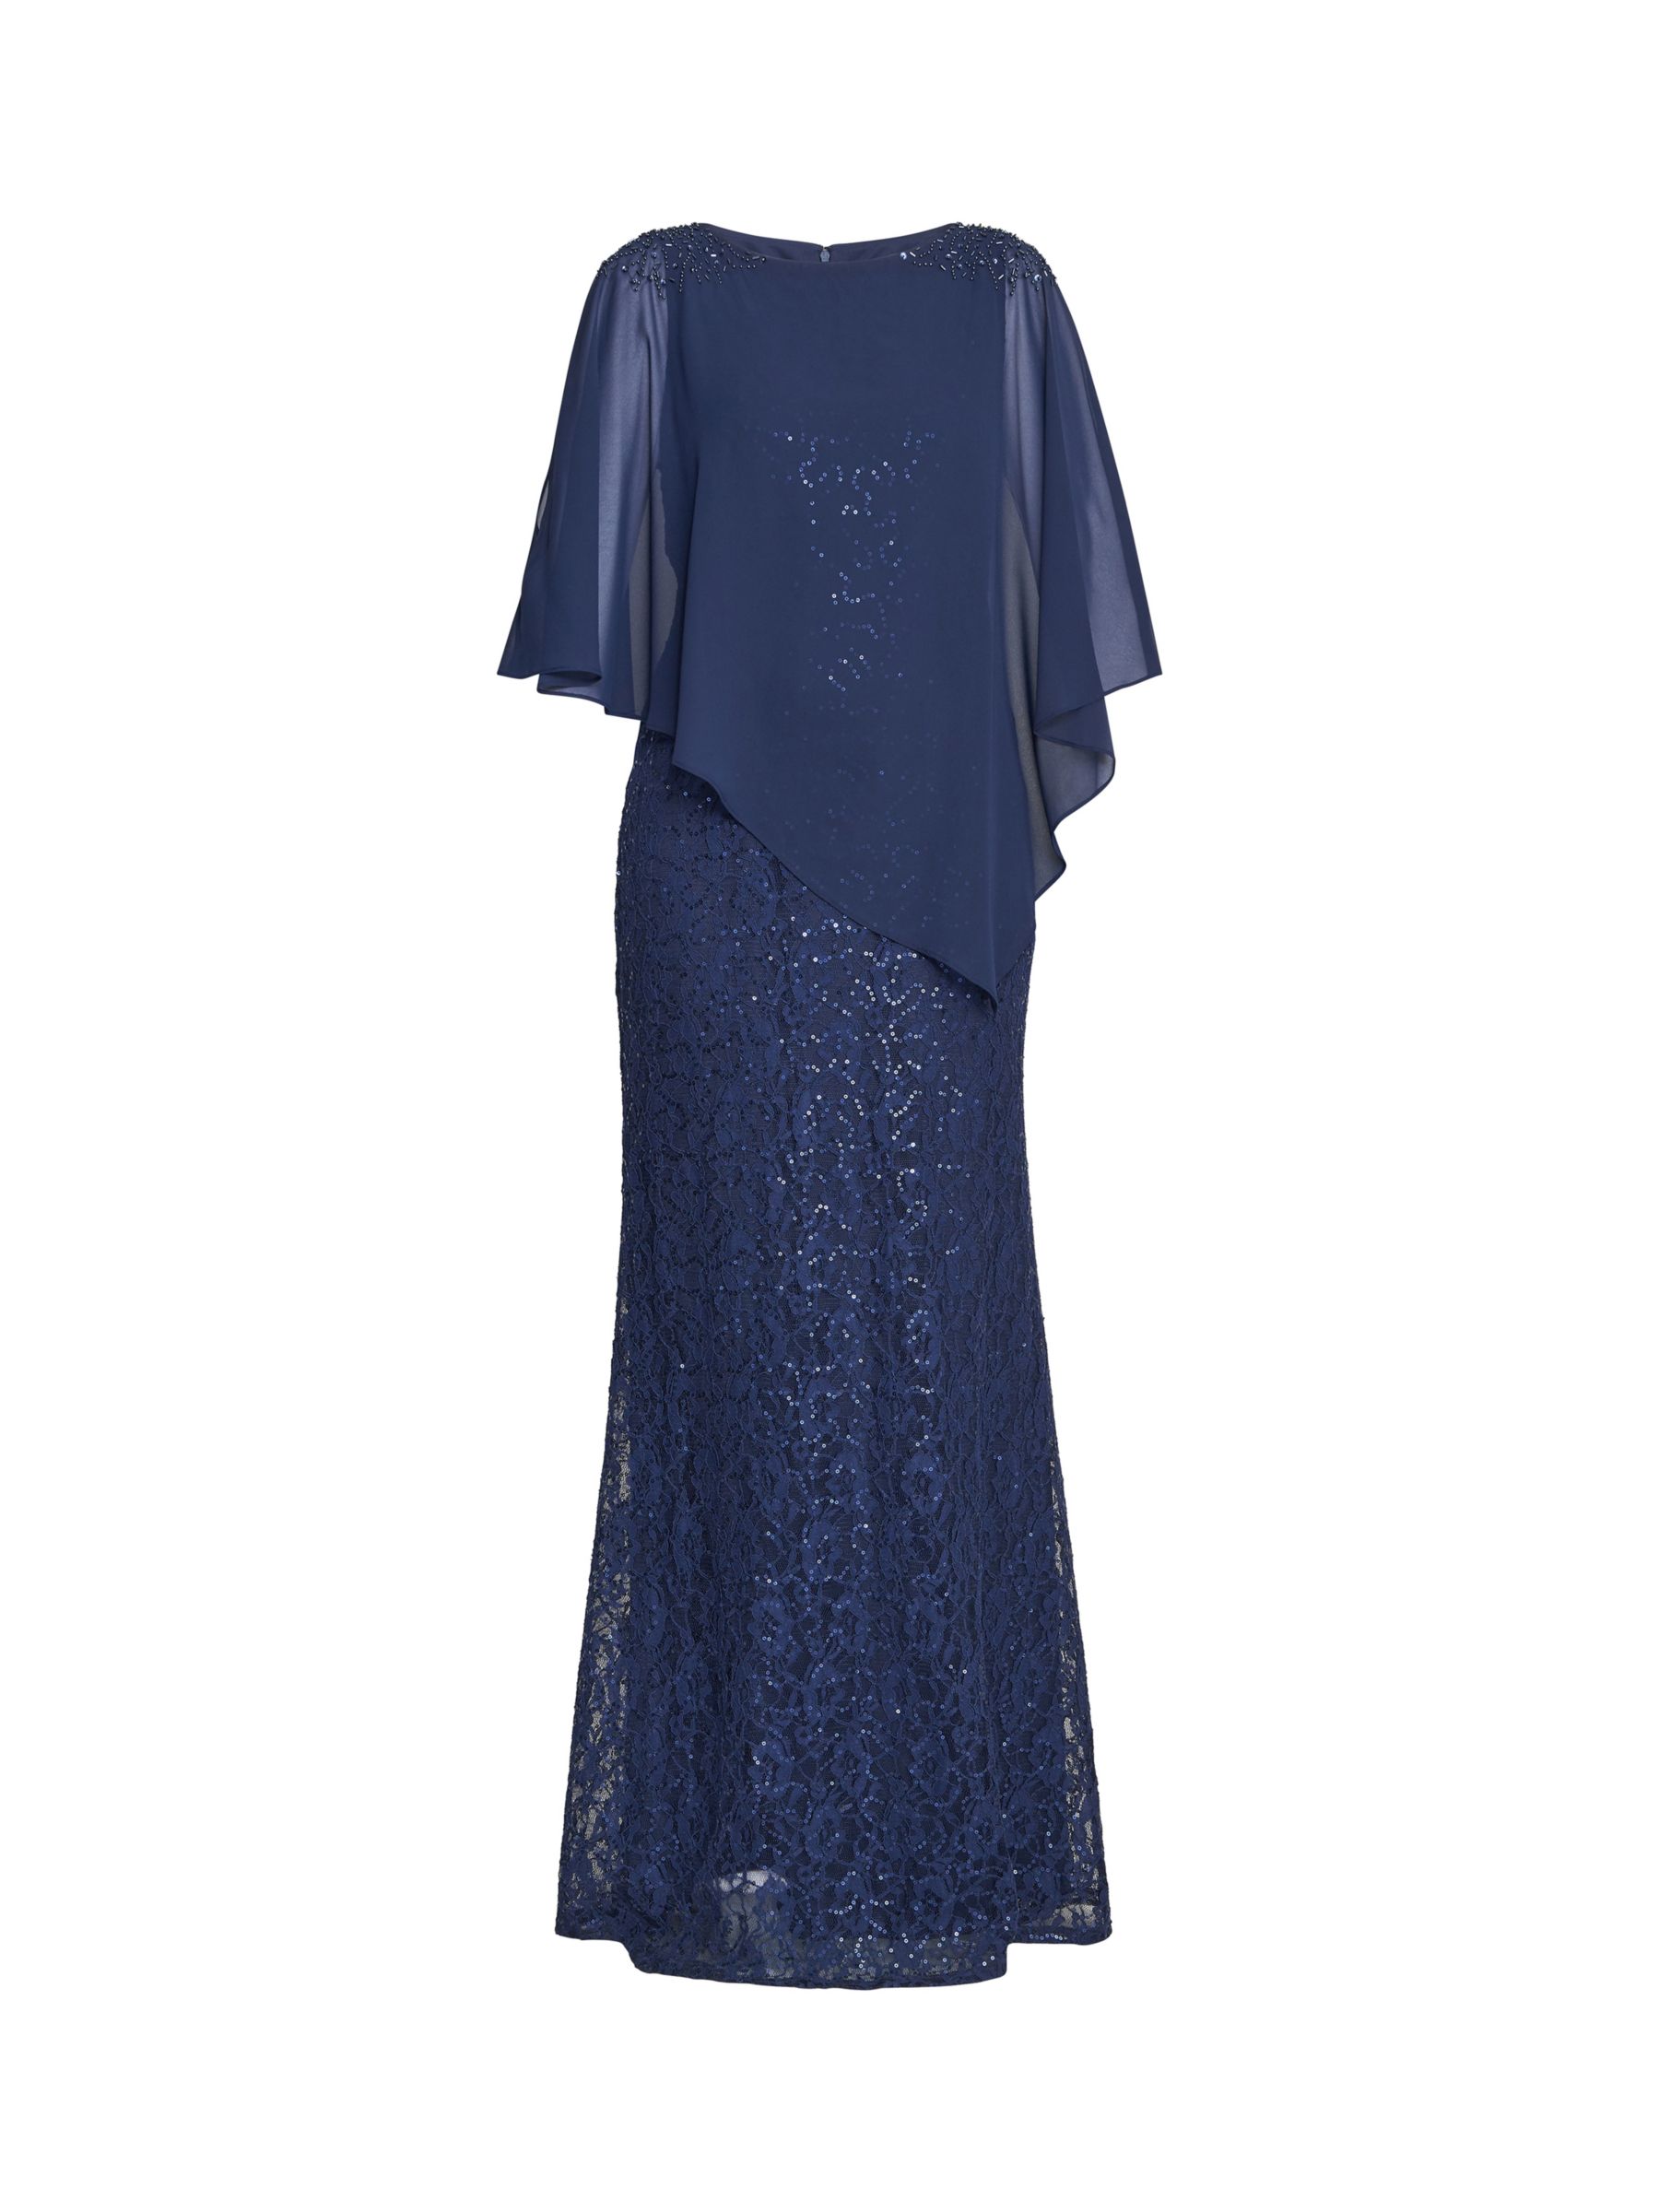 Gina Bacconi Ginger Sequin Lace Dress with Chiffon Cape, Spring Navy at ...